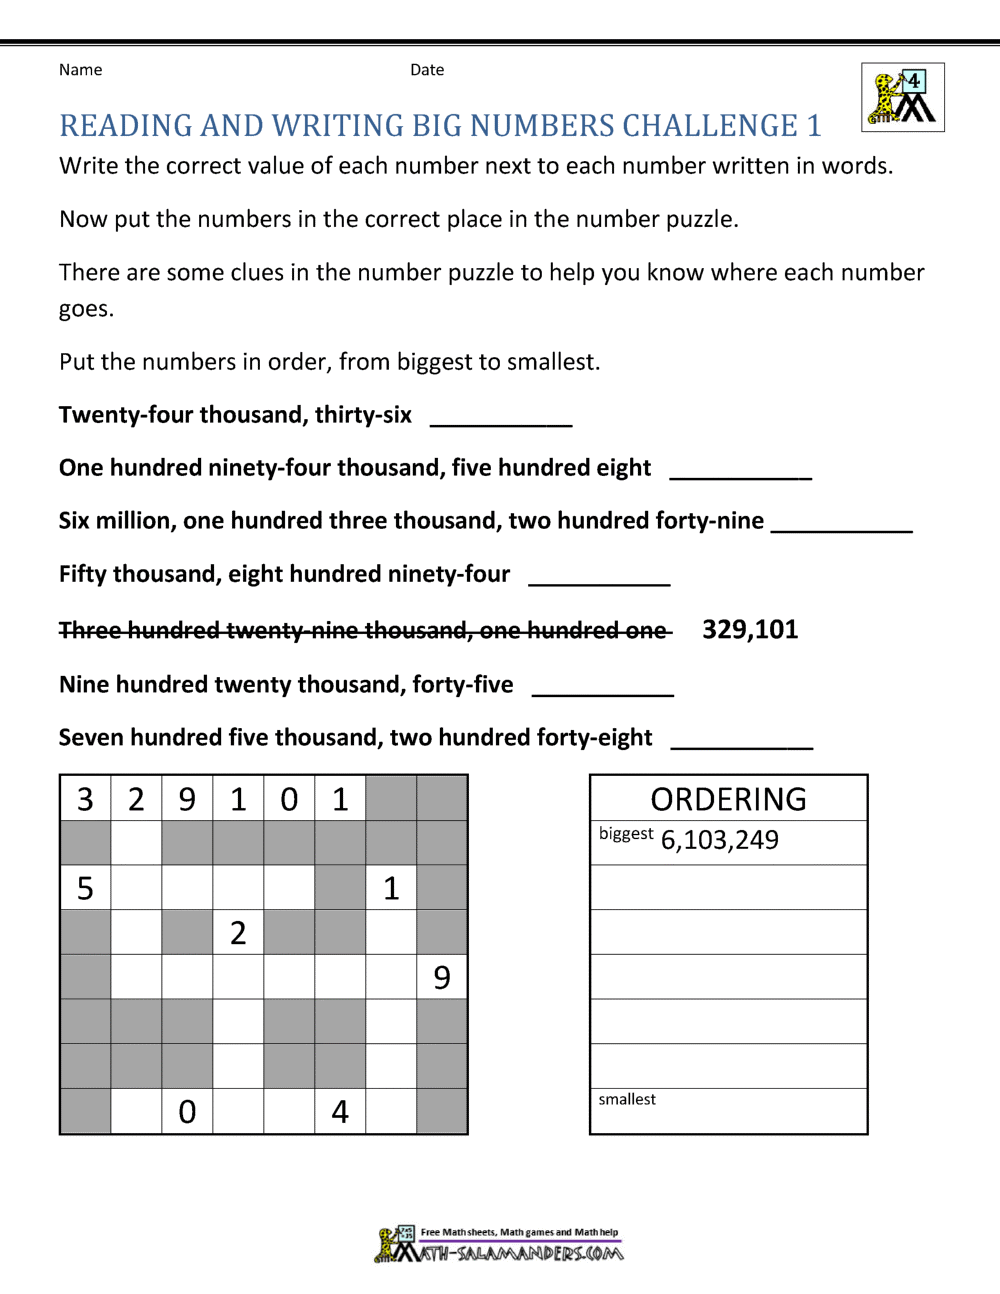 comparing-large-numbers-worksheets